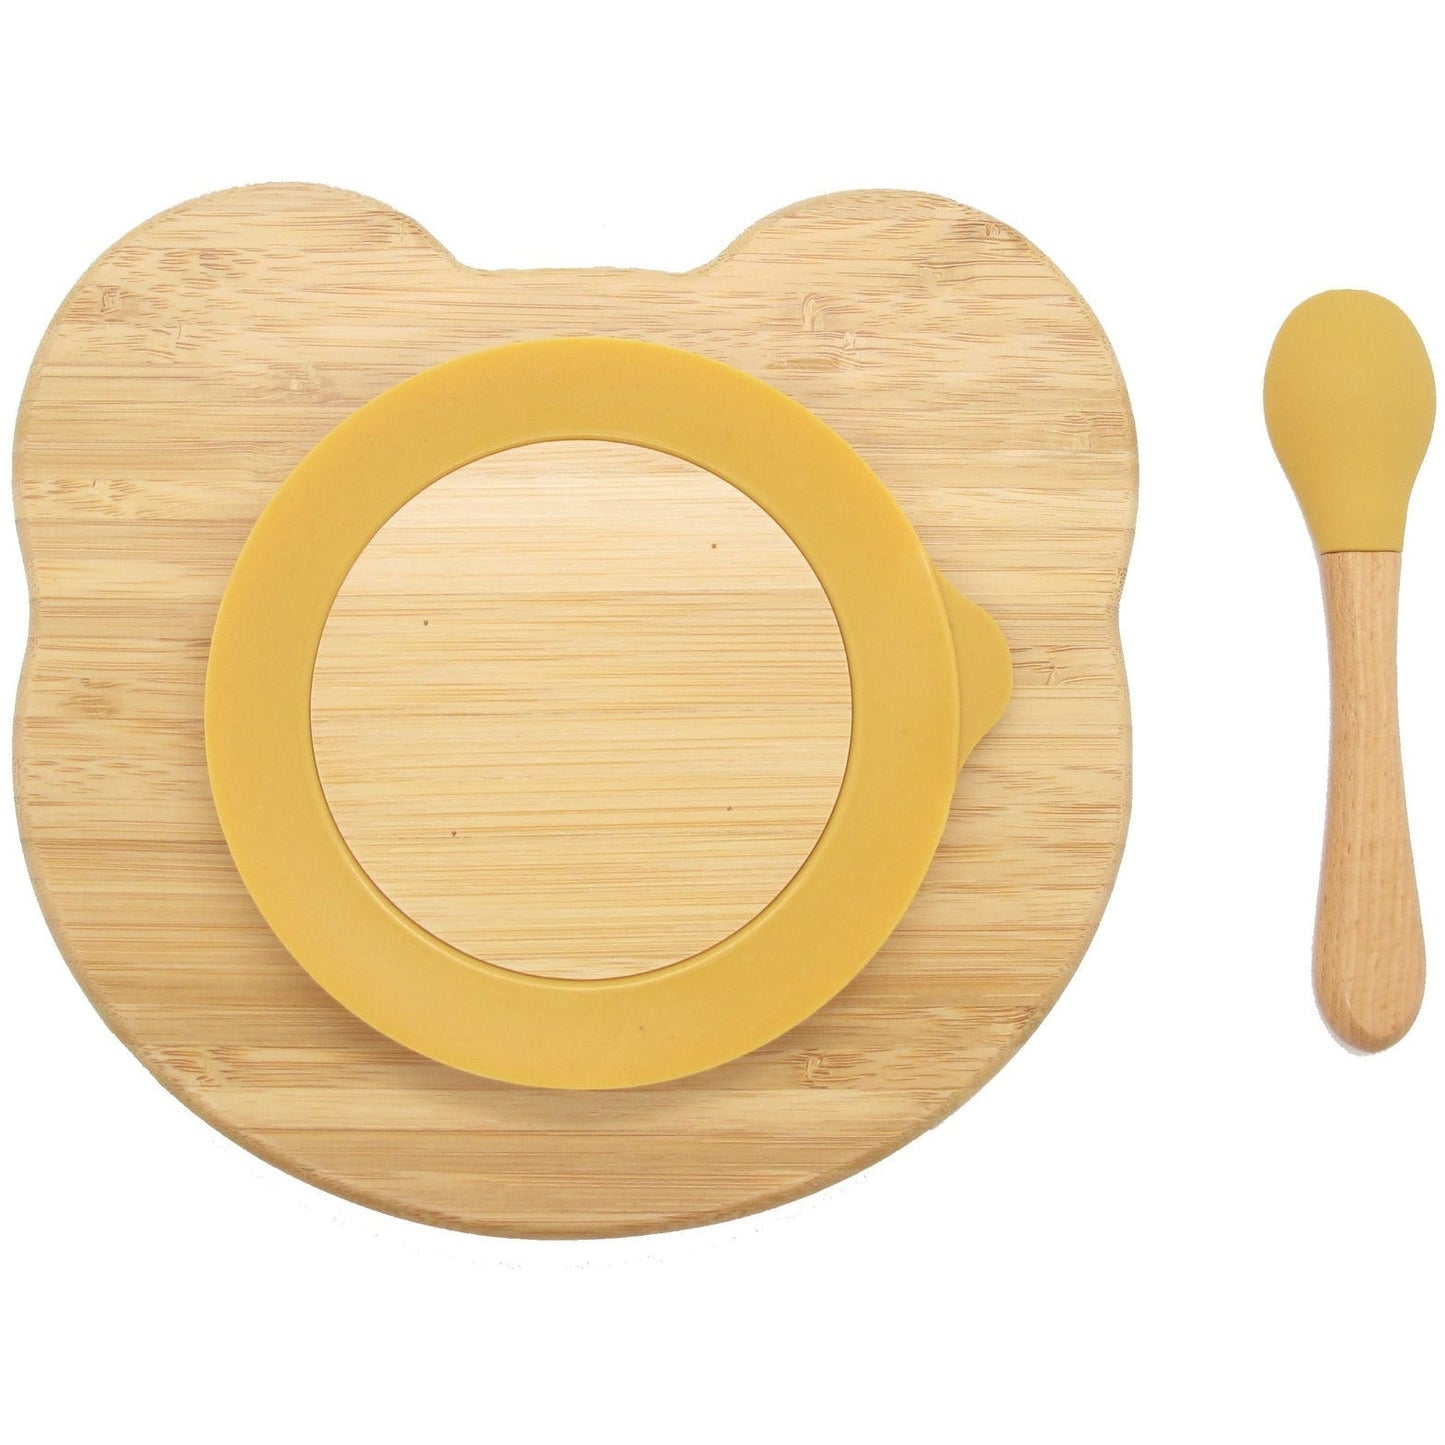 Bamboo Kids Teddy Plate with Suction Cap Base & Spoon - Little Kids Business